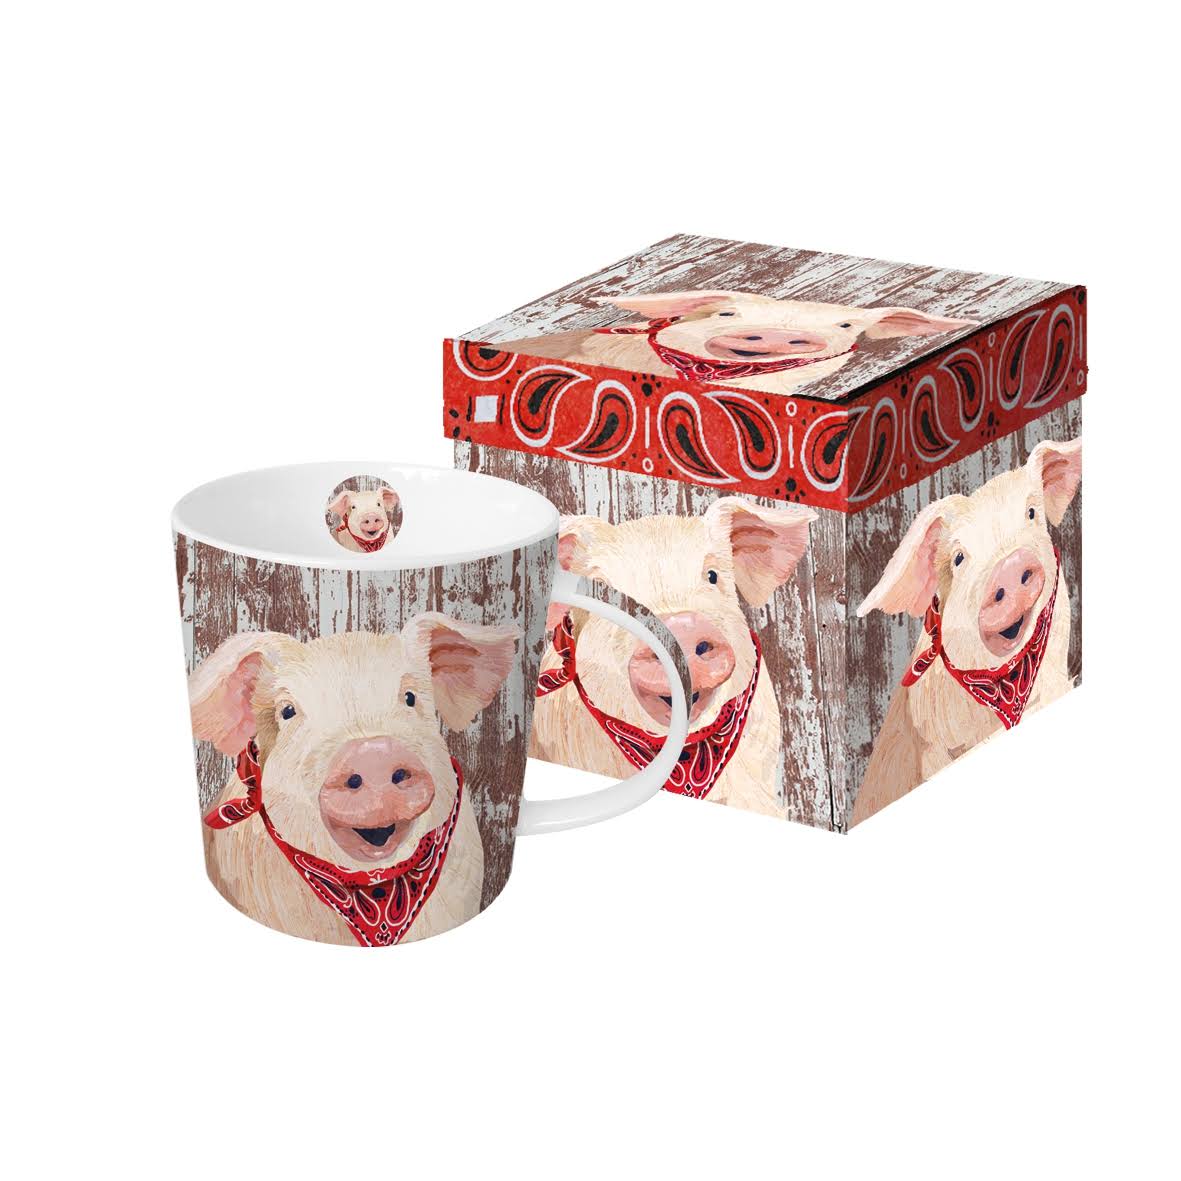 Paperproducts Design 603087 Gift Boxed Mug with Charlotte Design